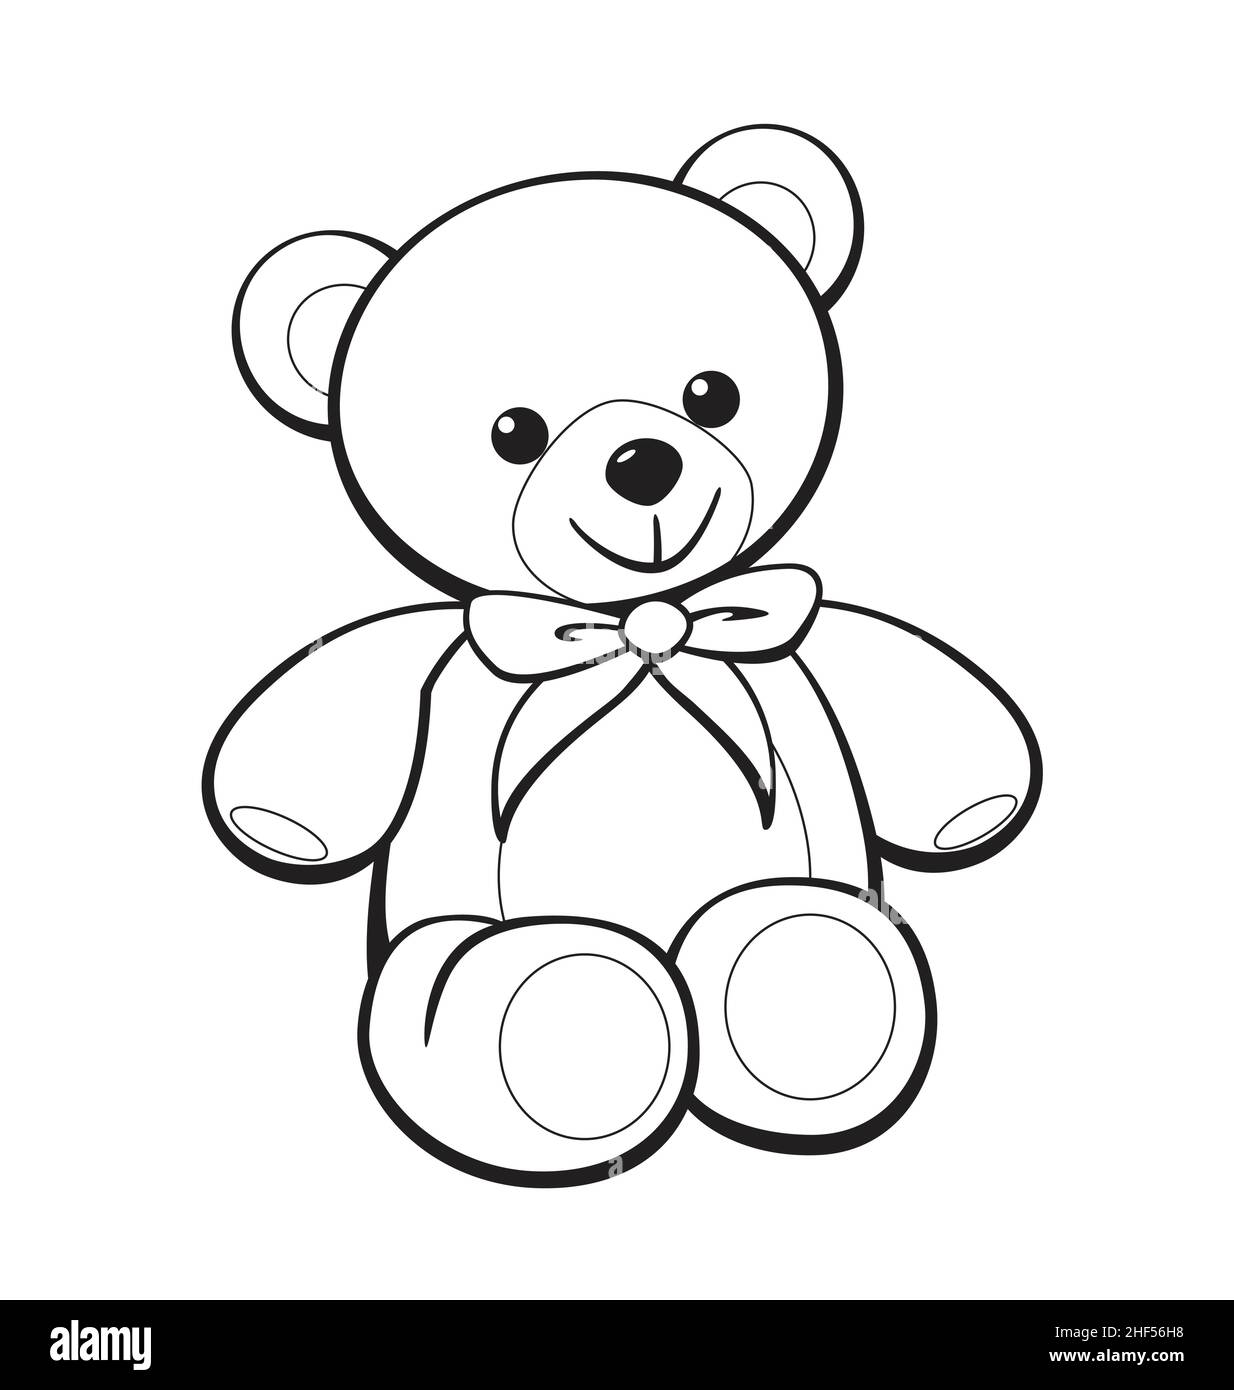 Cute smiling cartoon teddy bear for coloring in activity book image vector isolated on white background Stock Vector